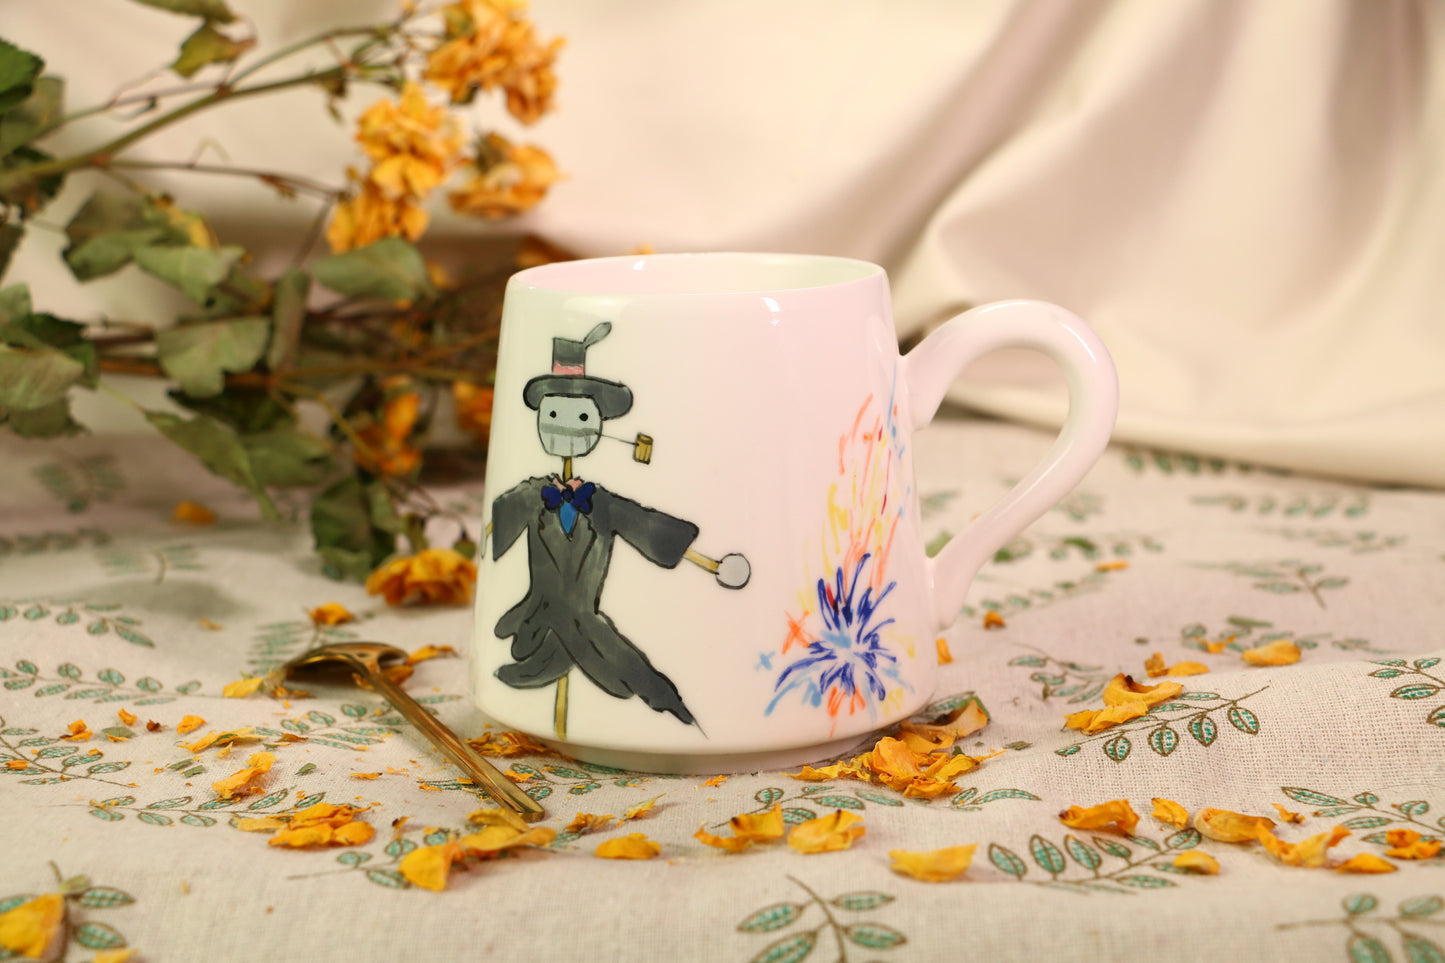 Howl Handmade Ceramic Mugs, Personalized Pottery Cup for Anime Lovers